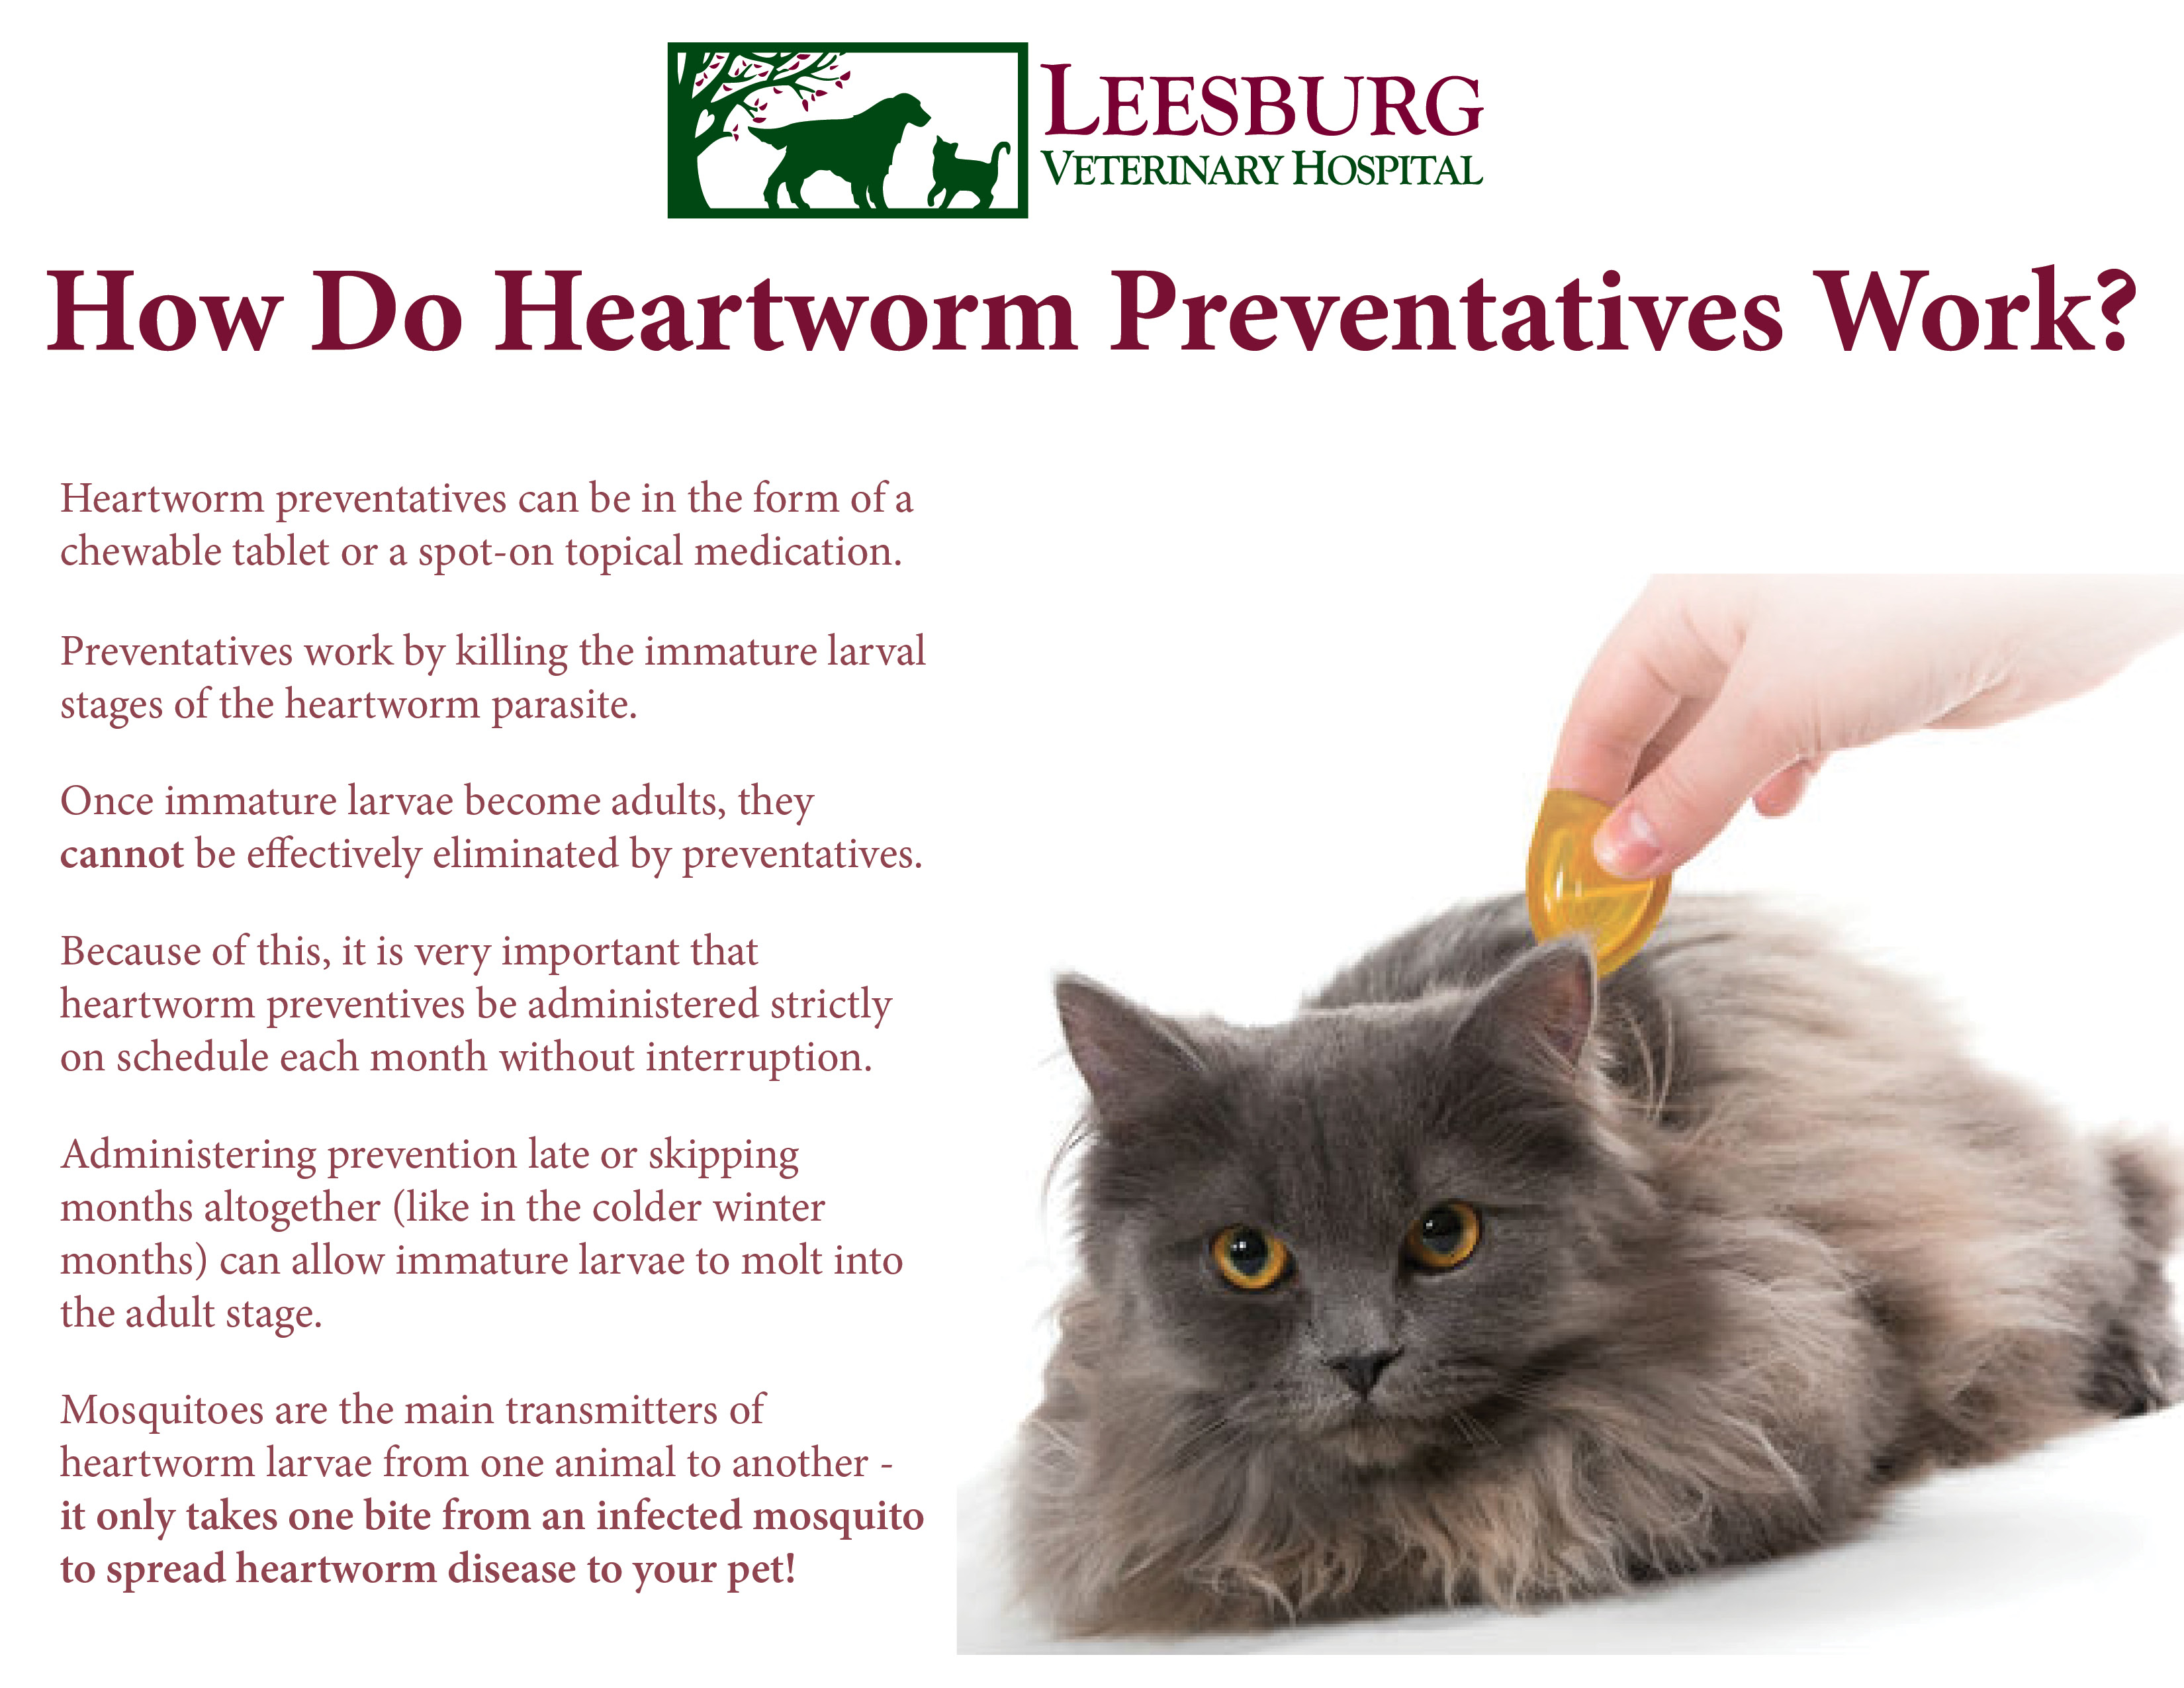 heartworm topical